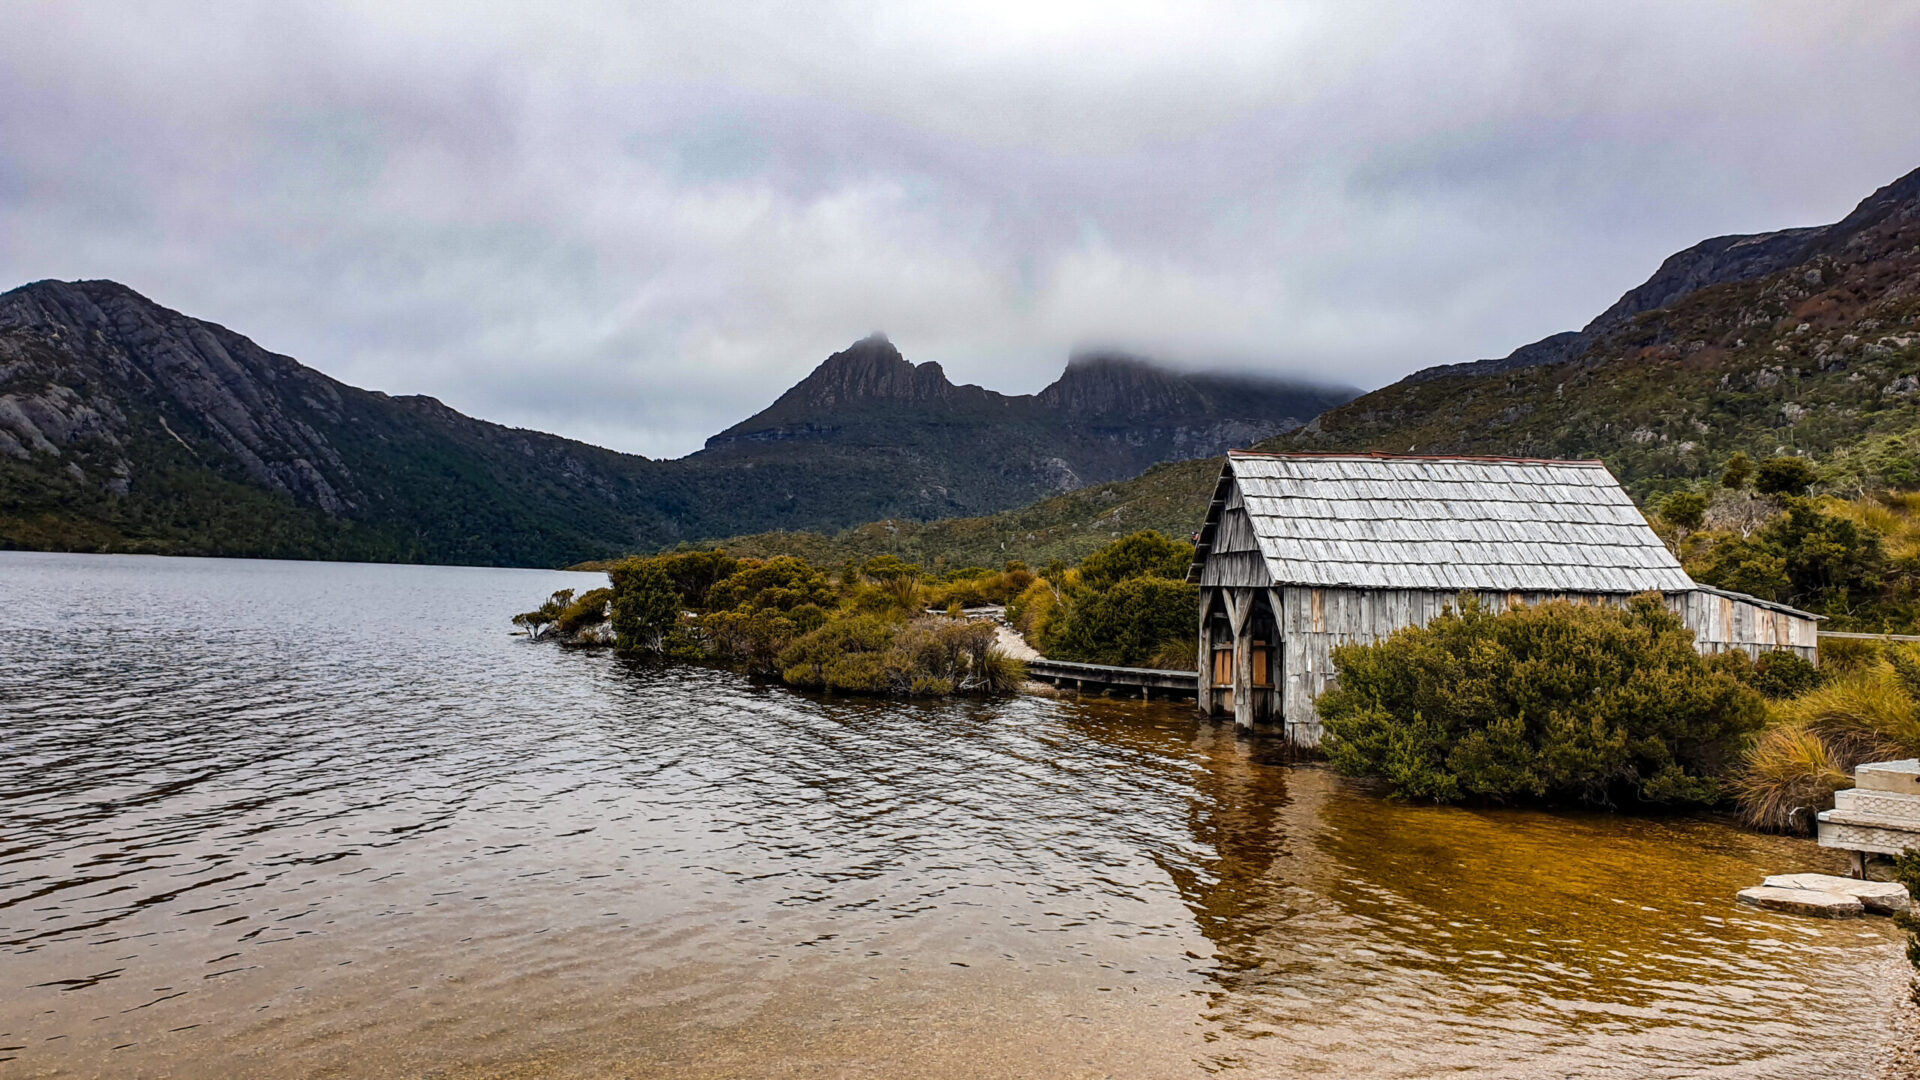 A boat shed on a lake with cloudy views of Cradle Mountain